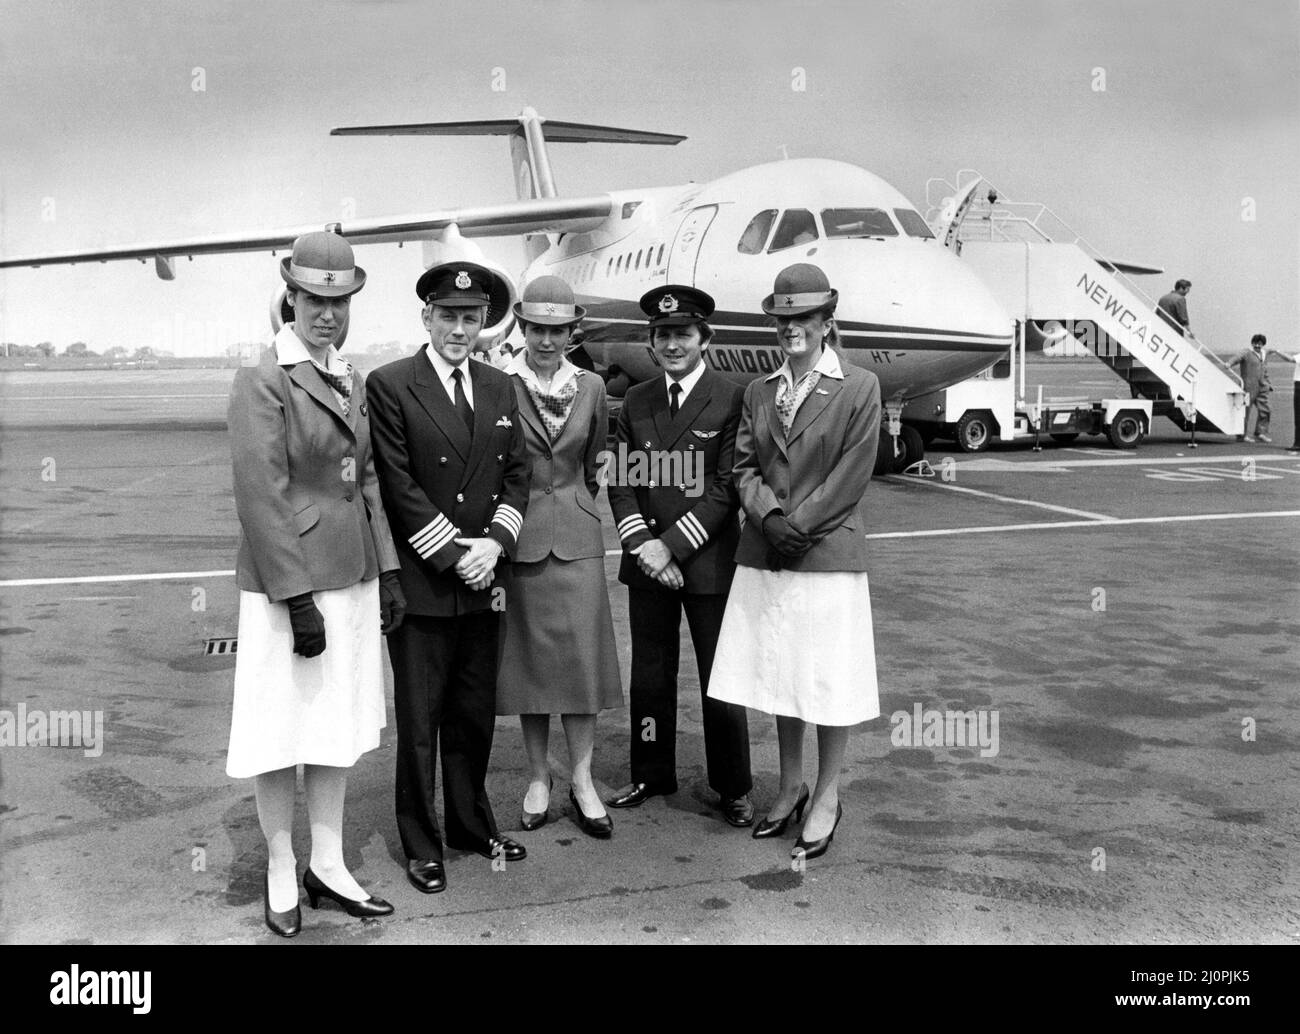 The new Dan-Air British Aerospace 146 (BAe 146), a medium-sized commercial airliner/aircraft also known as the 'Whisper Jet'. The plane flew officials and press into Newcastle Airport to publicise the new 7m jet and service.   The crew, left to right, are stewardess Joyce Pearcey, Capt. John Nightingale, stewardess Frances Shepherd, senior first officer Owen Wright and stewardess Gail Gillies.    12/06/1983 Stock Photo